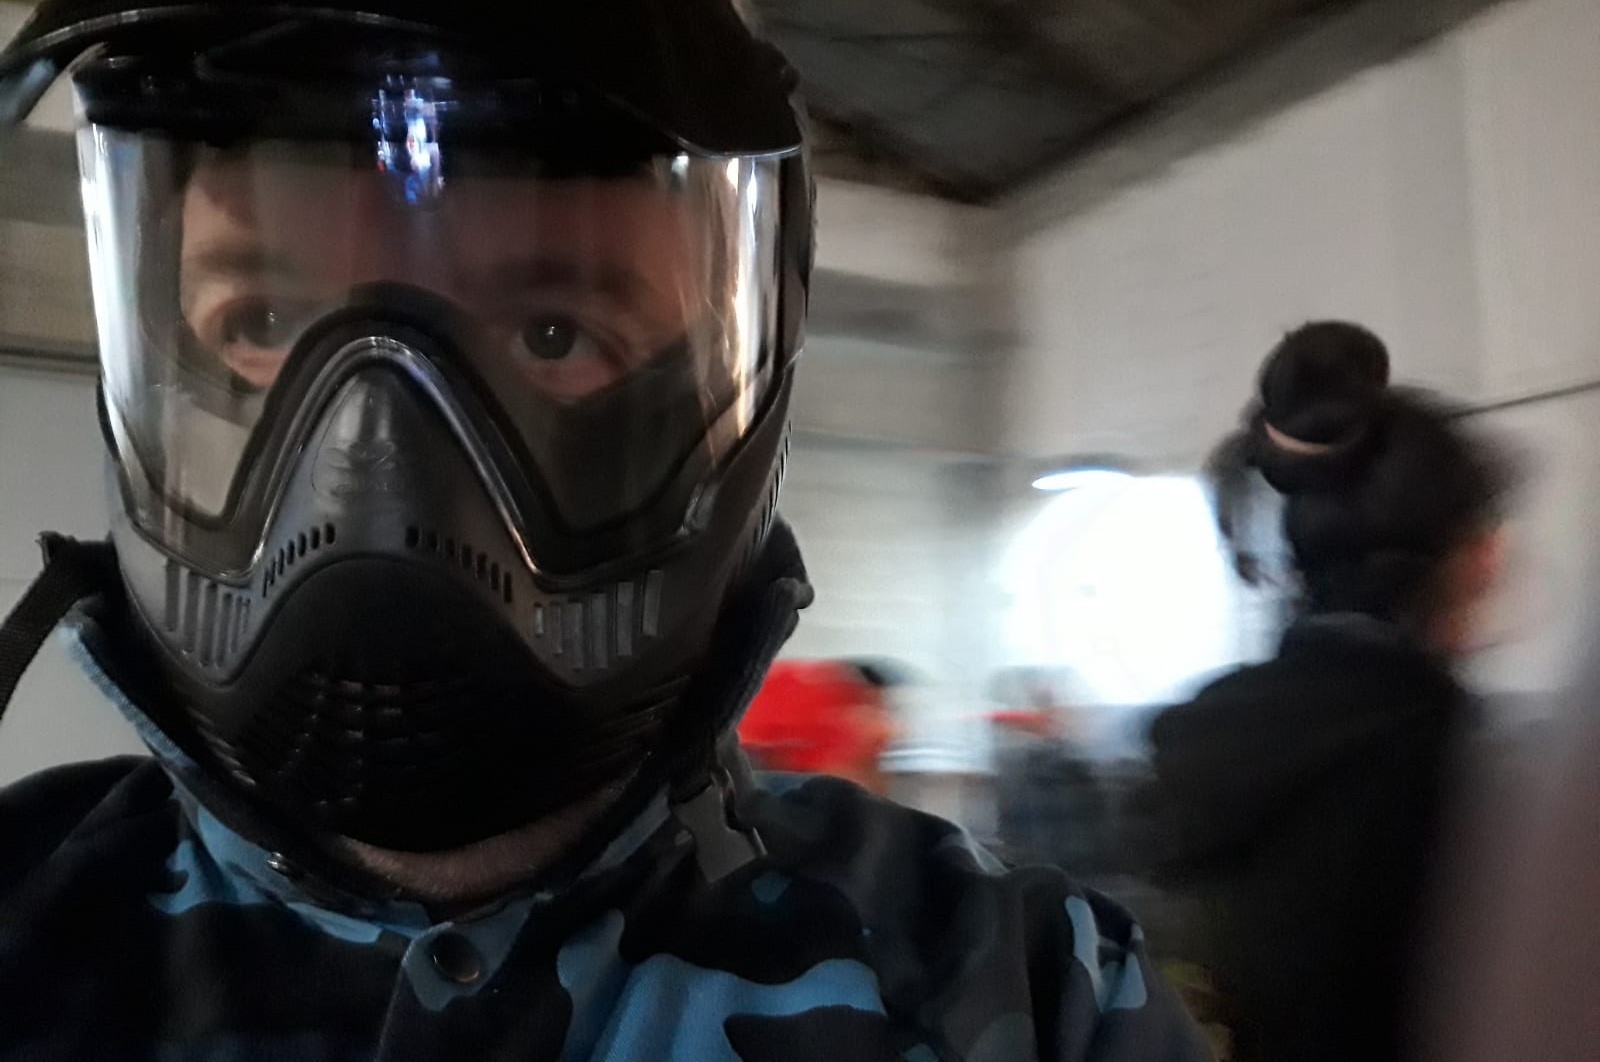 Another year, another challenge: Zalox’s team went playing Paintball